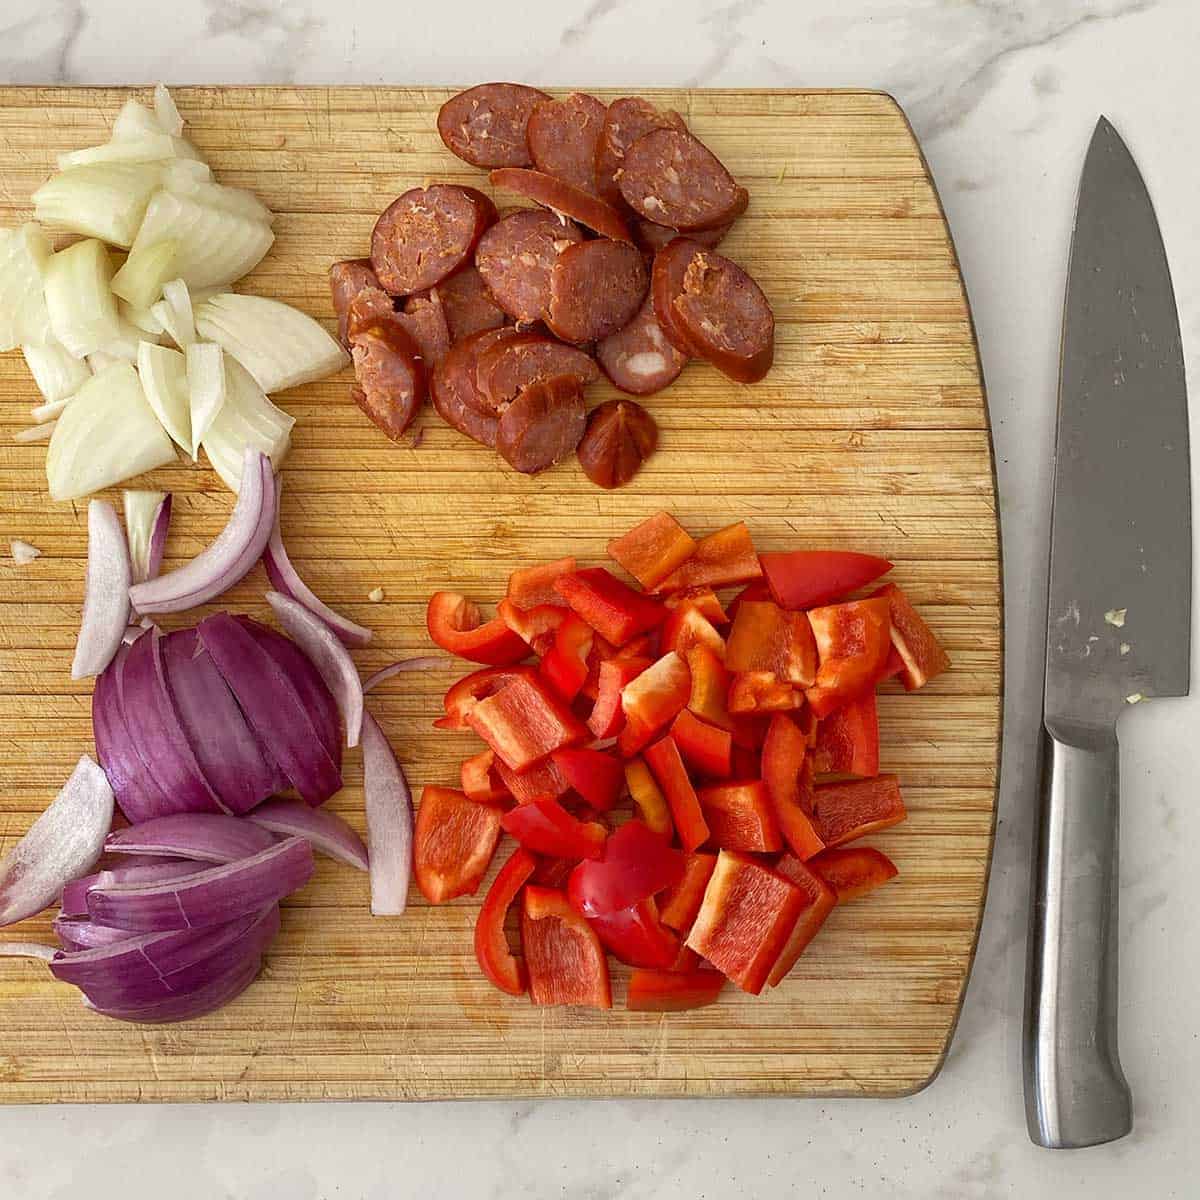 Onion, chorizo and capsicum on a wooden chopping board next to a large knife.